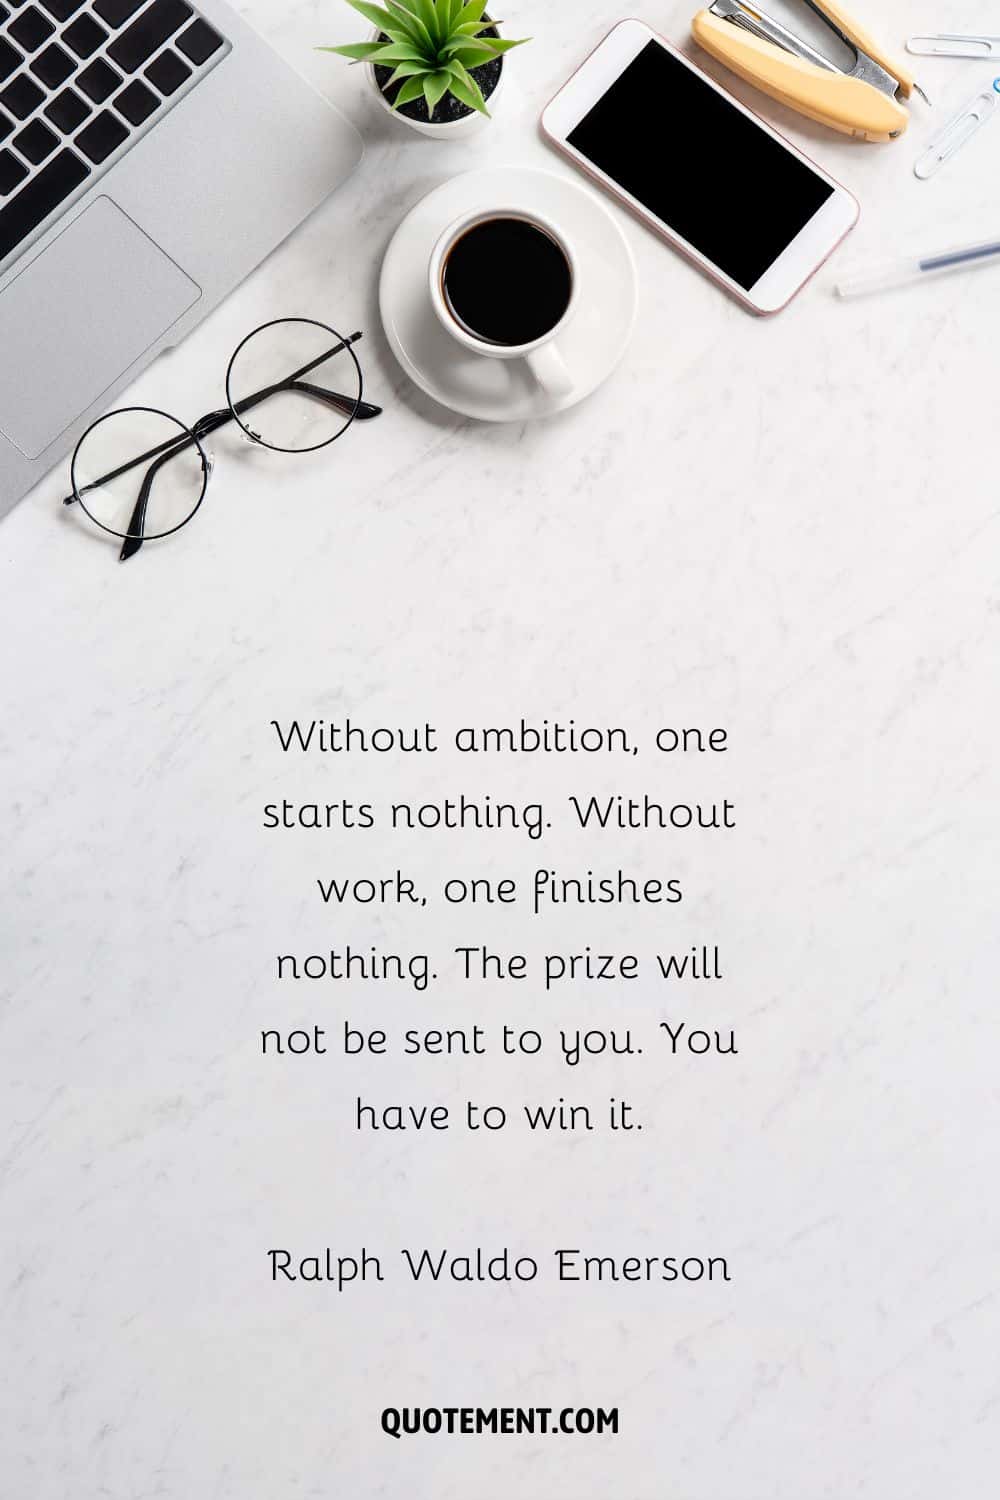 “Without ambition, one starts nothing. Without work, one finishes nothing. The prize will not be sent to you. You have to win it.” — Ralph Waldo Emerson